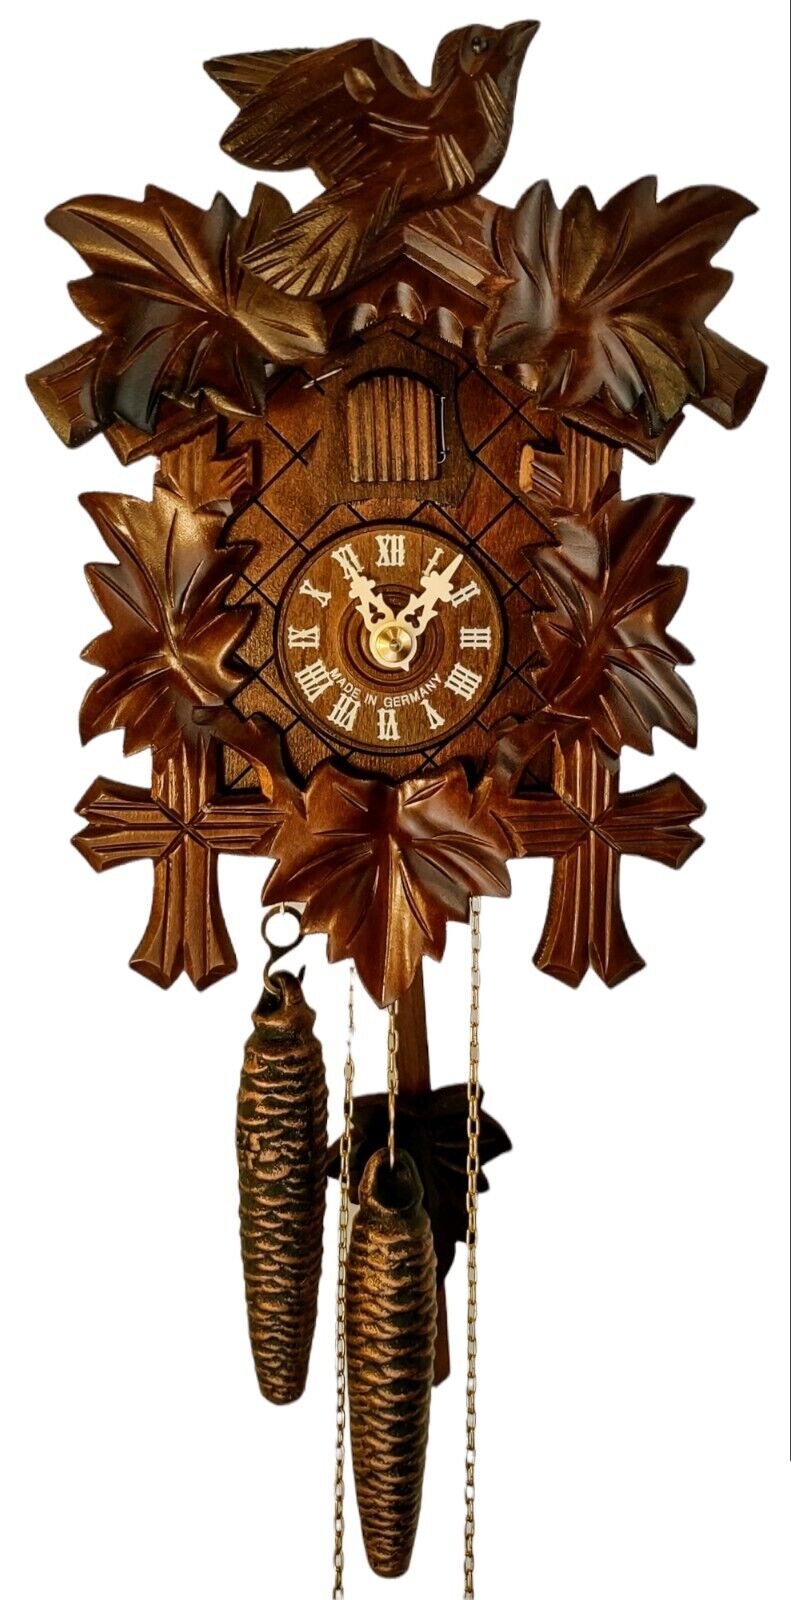 Sternreiter – German Cuckoo Clock with One-Day Movement